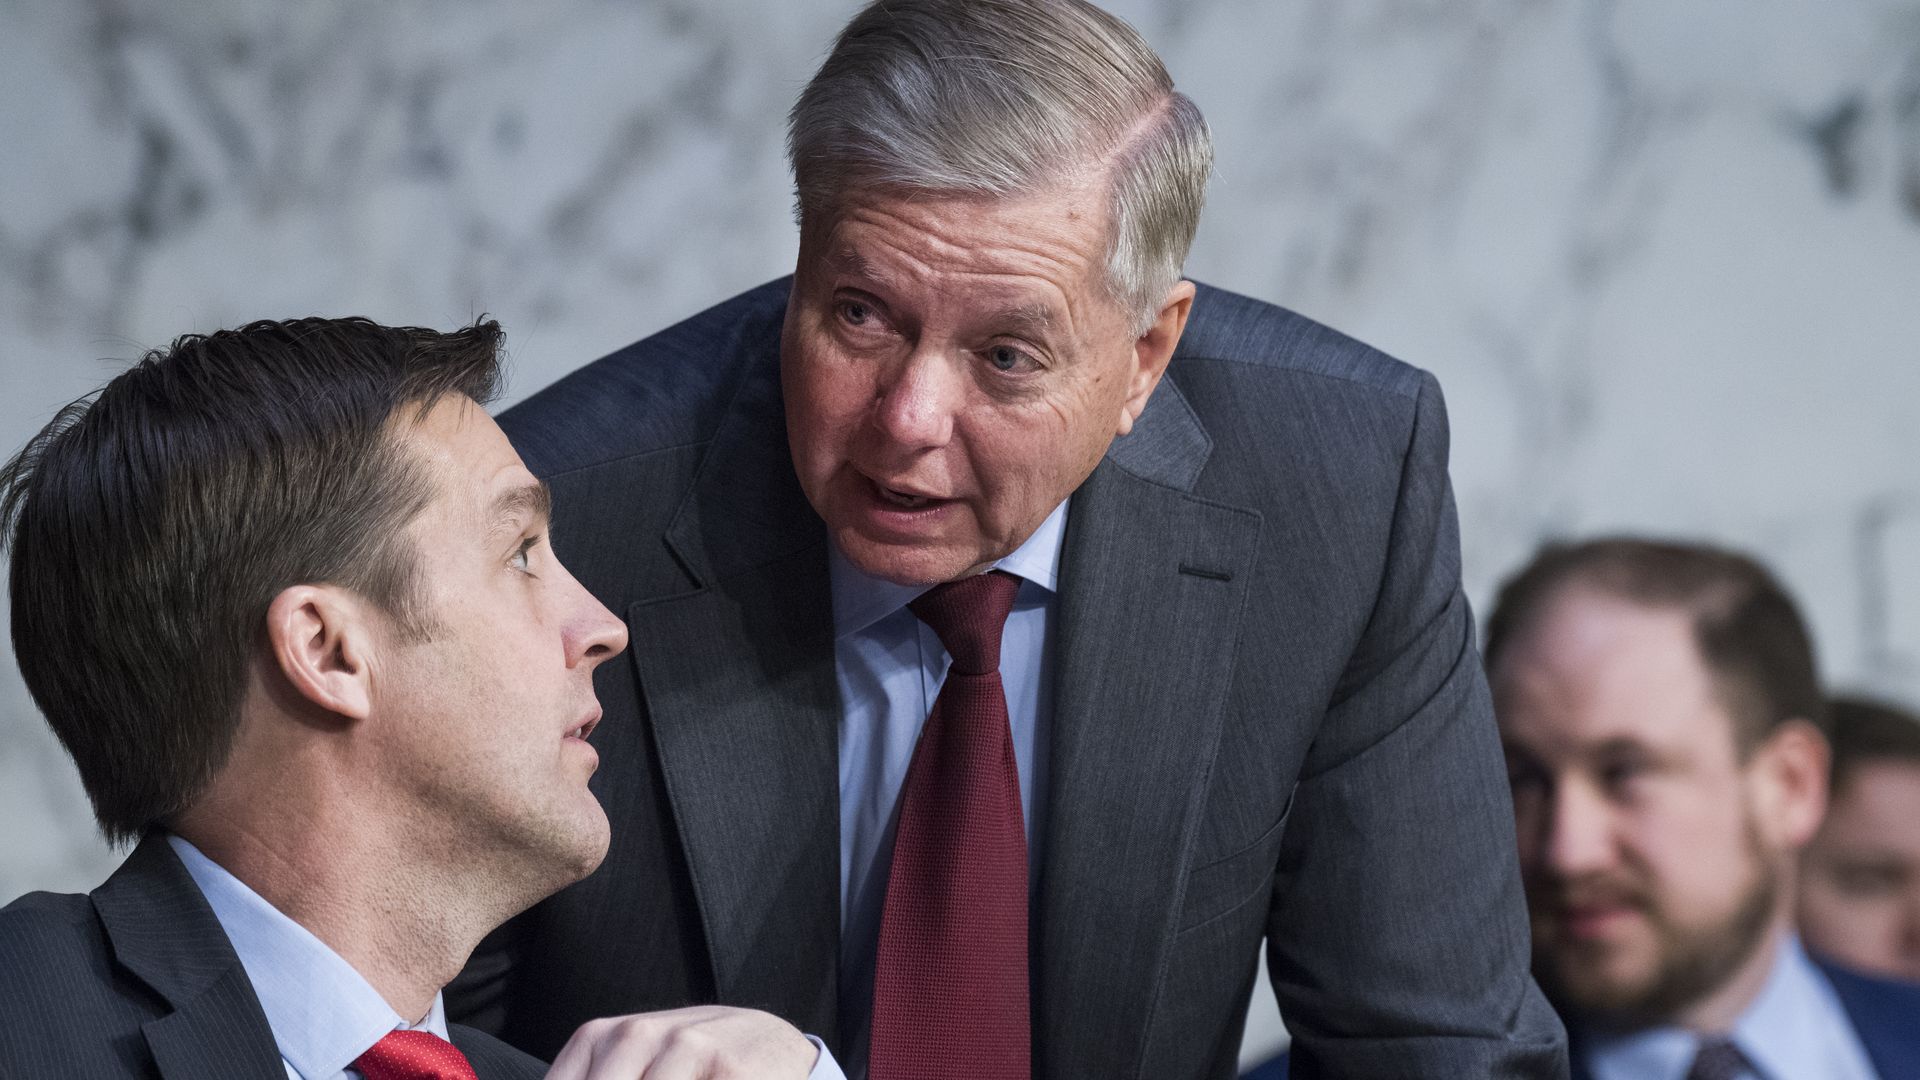 Sens. Ben Sasse and Lindsey Graham during a committee hearing in January 2019.